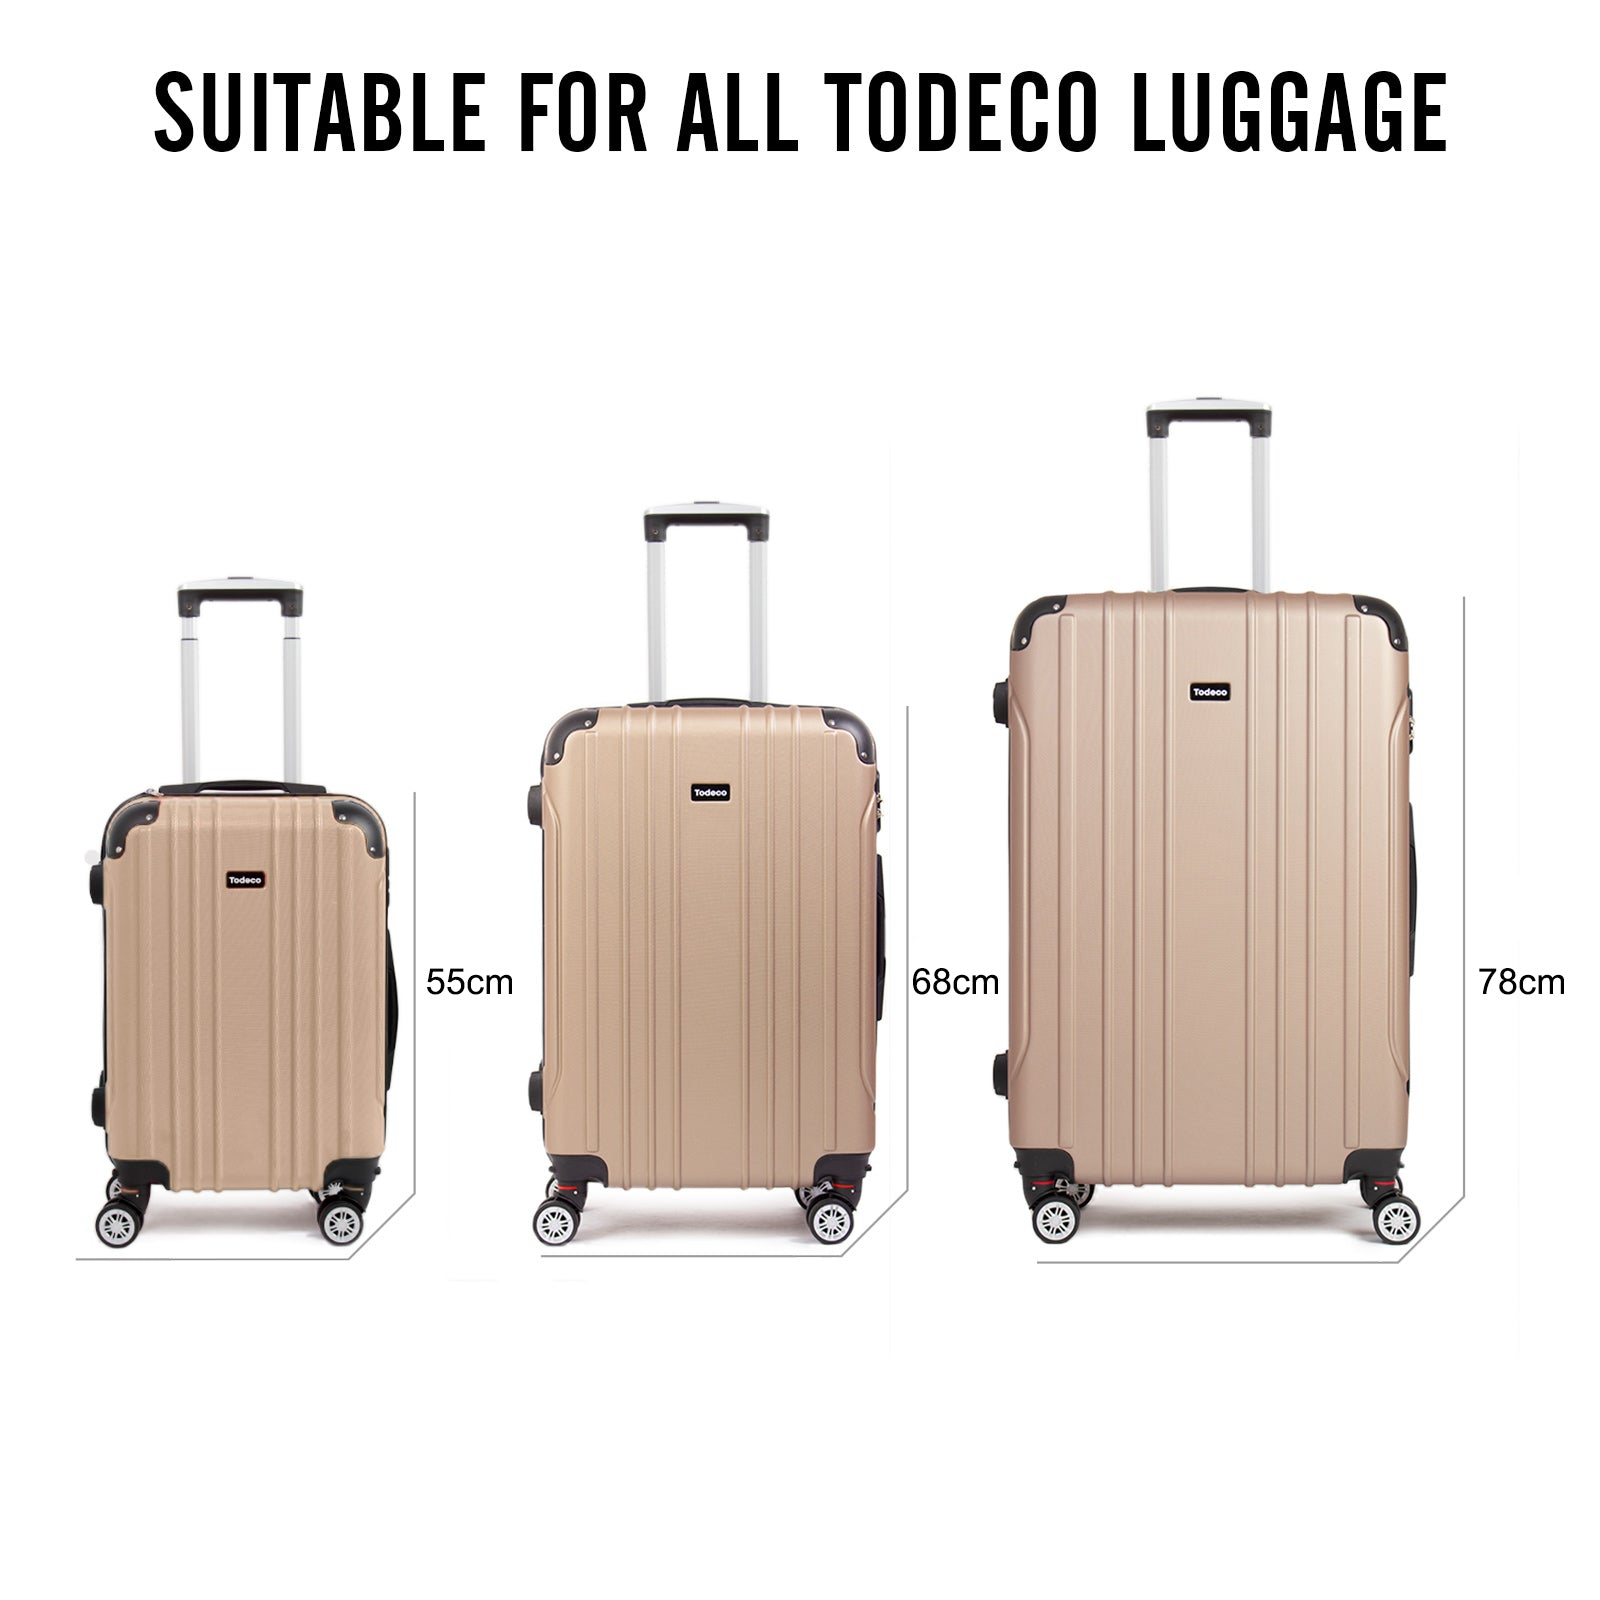 4-Pieces-Luggage-Suitcase-Wheels-Durable-Swivel-Casters-for-Luggage-Replacement-Wheels-for-Suitcases-4-Pieces-Luggage-Suitcase-Wheels